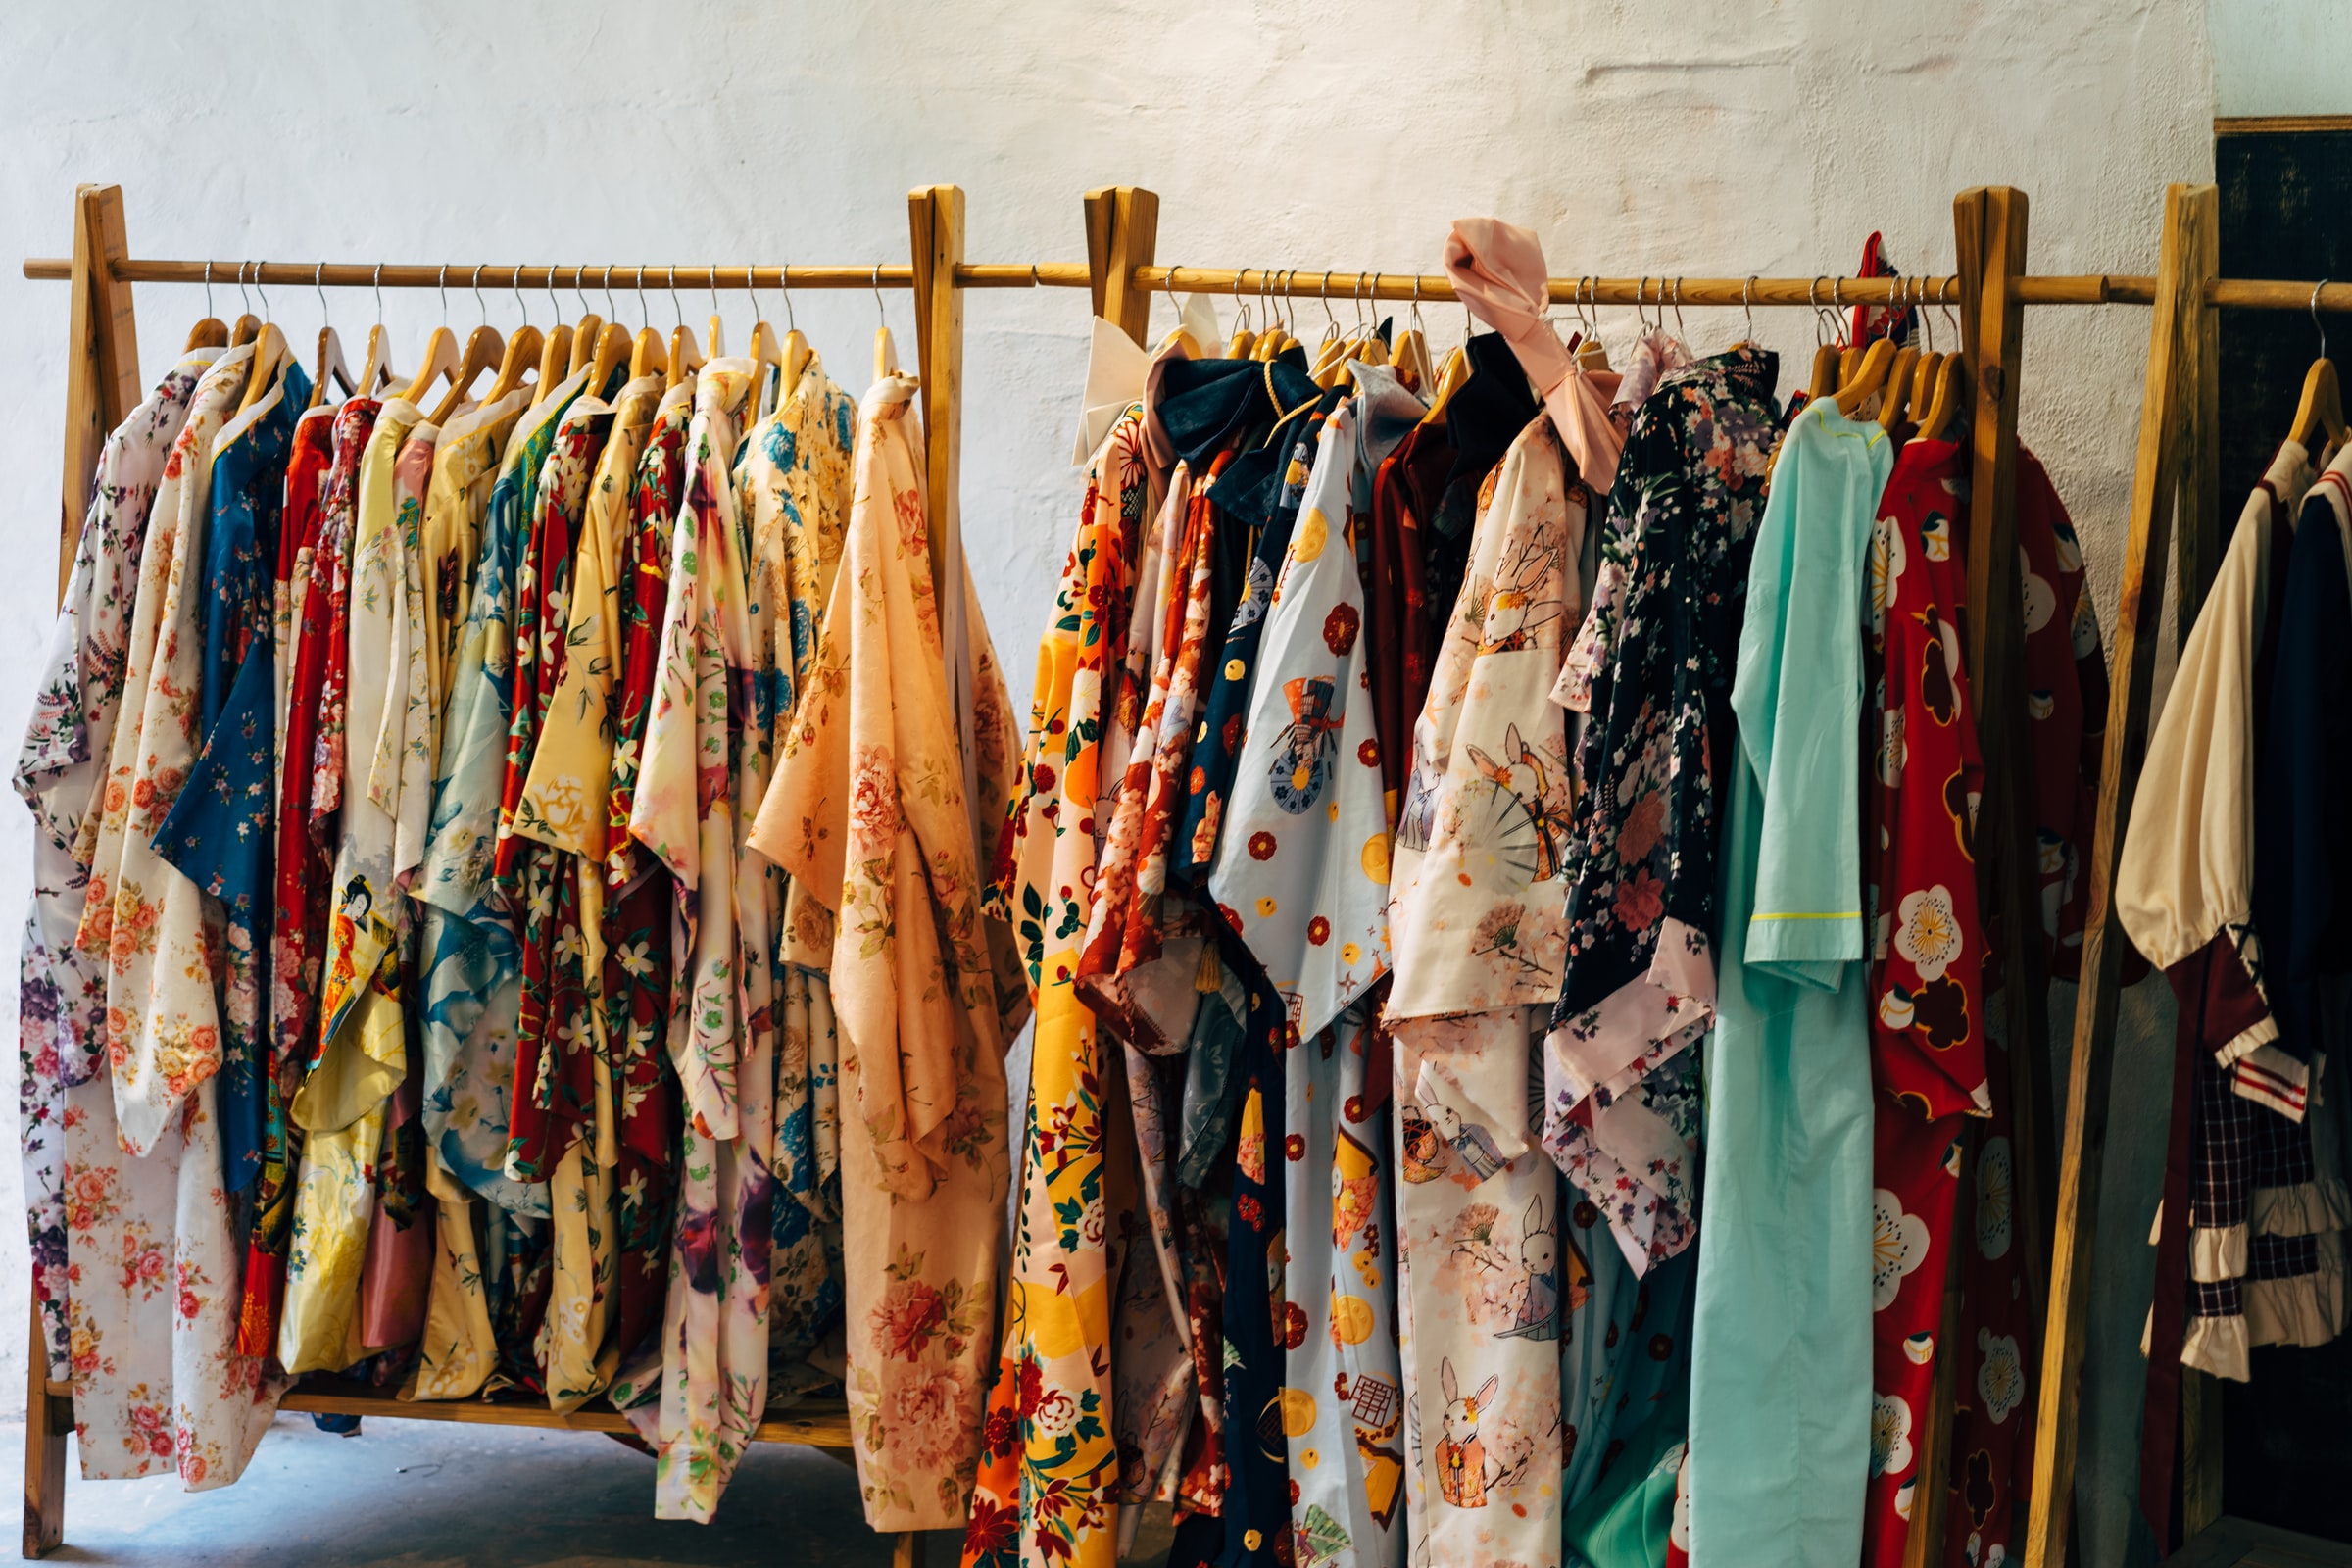 Fashion rental options are becoming more popular.